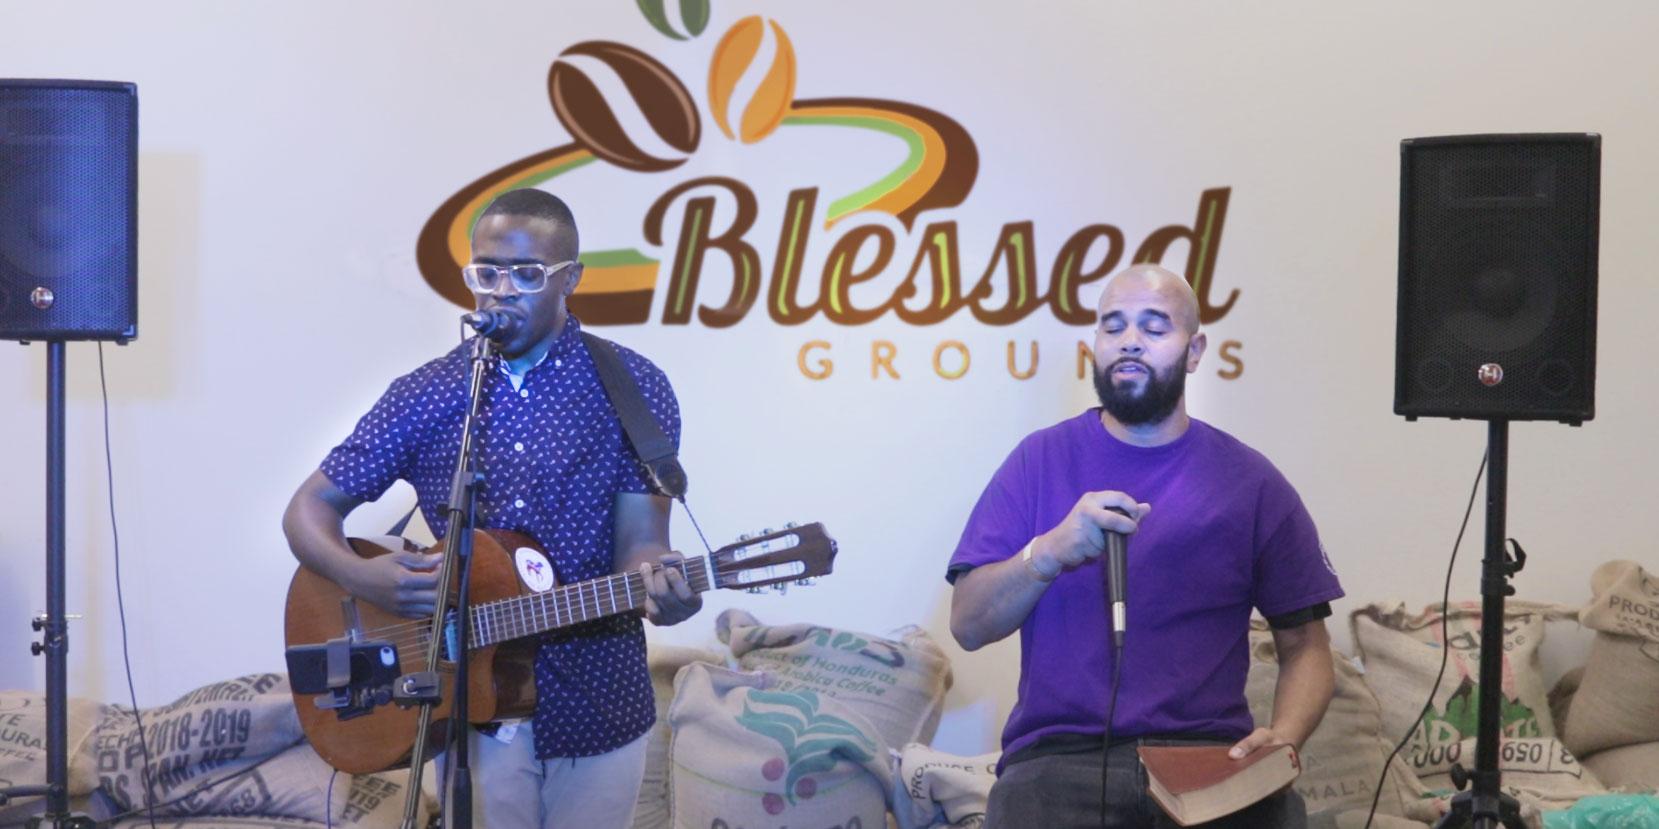 Jesus Party (Live Worship Sessions) @ Blessed Grounds